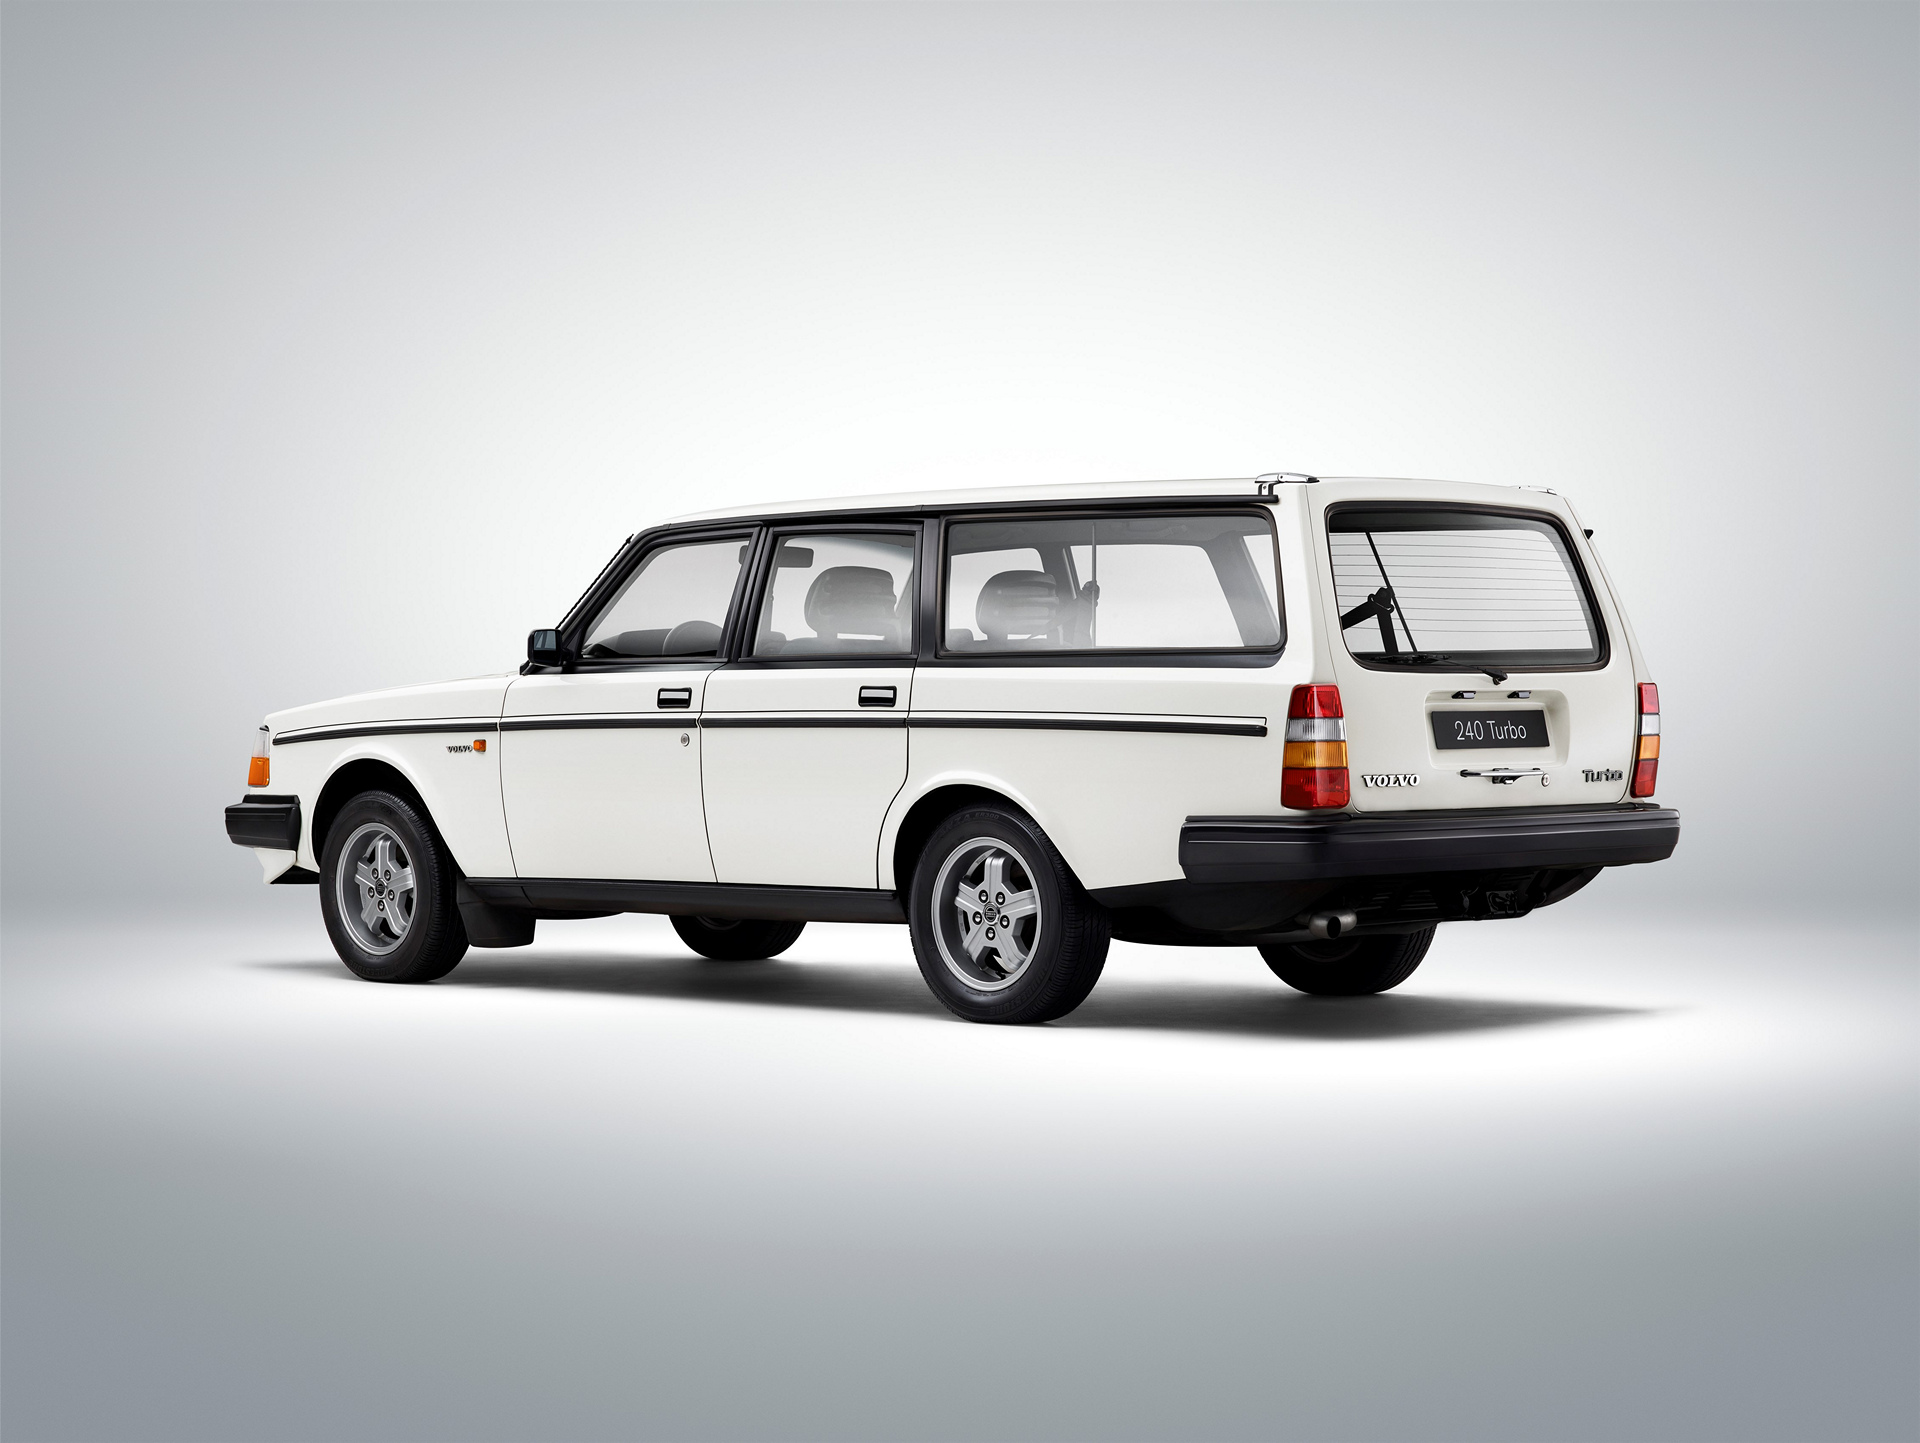 Volvo 245 Turbo © Zhejiang Geely Holding Group Co., Ltd